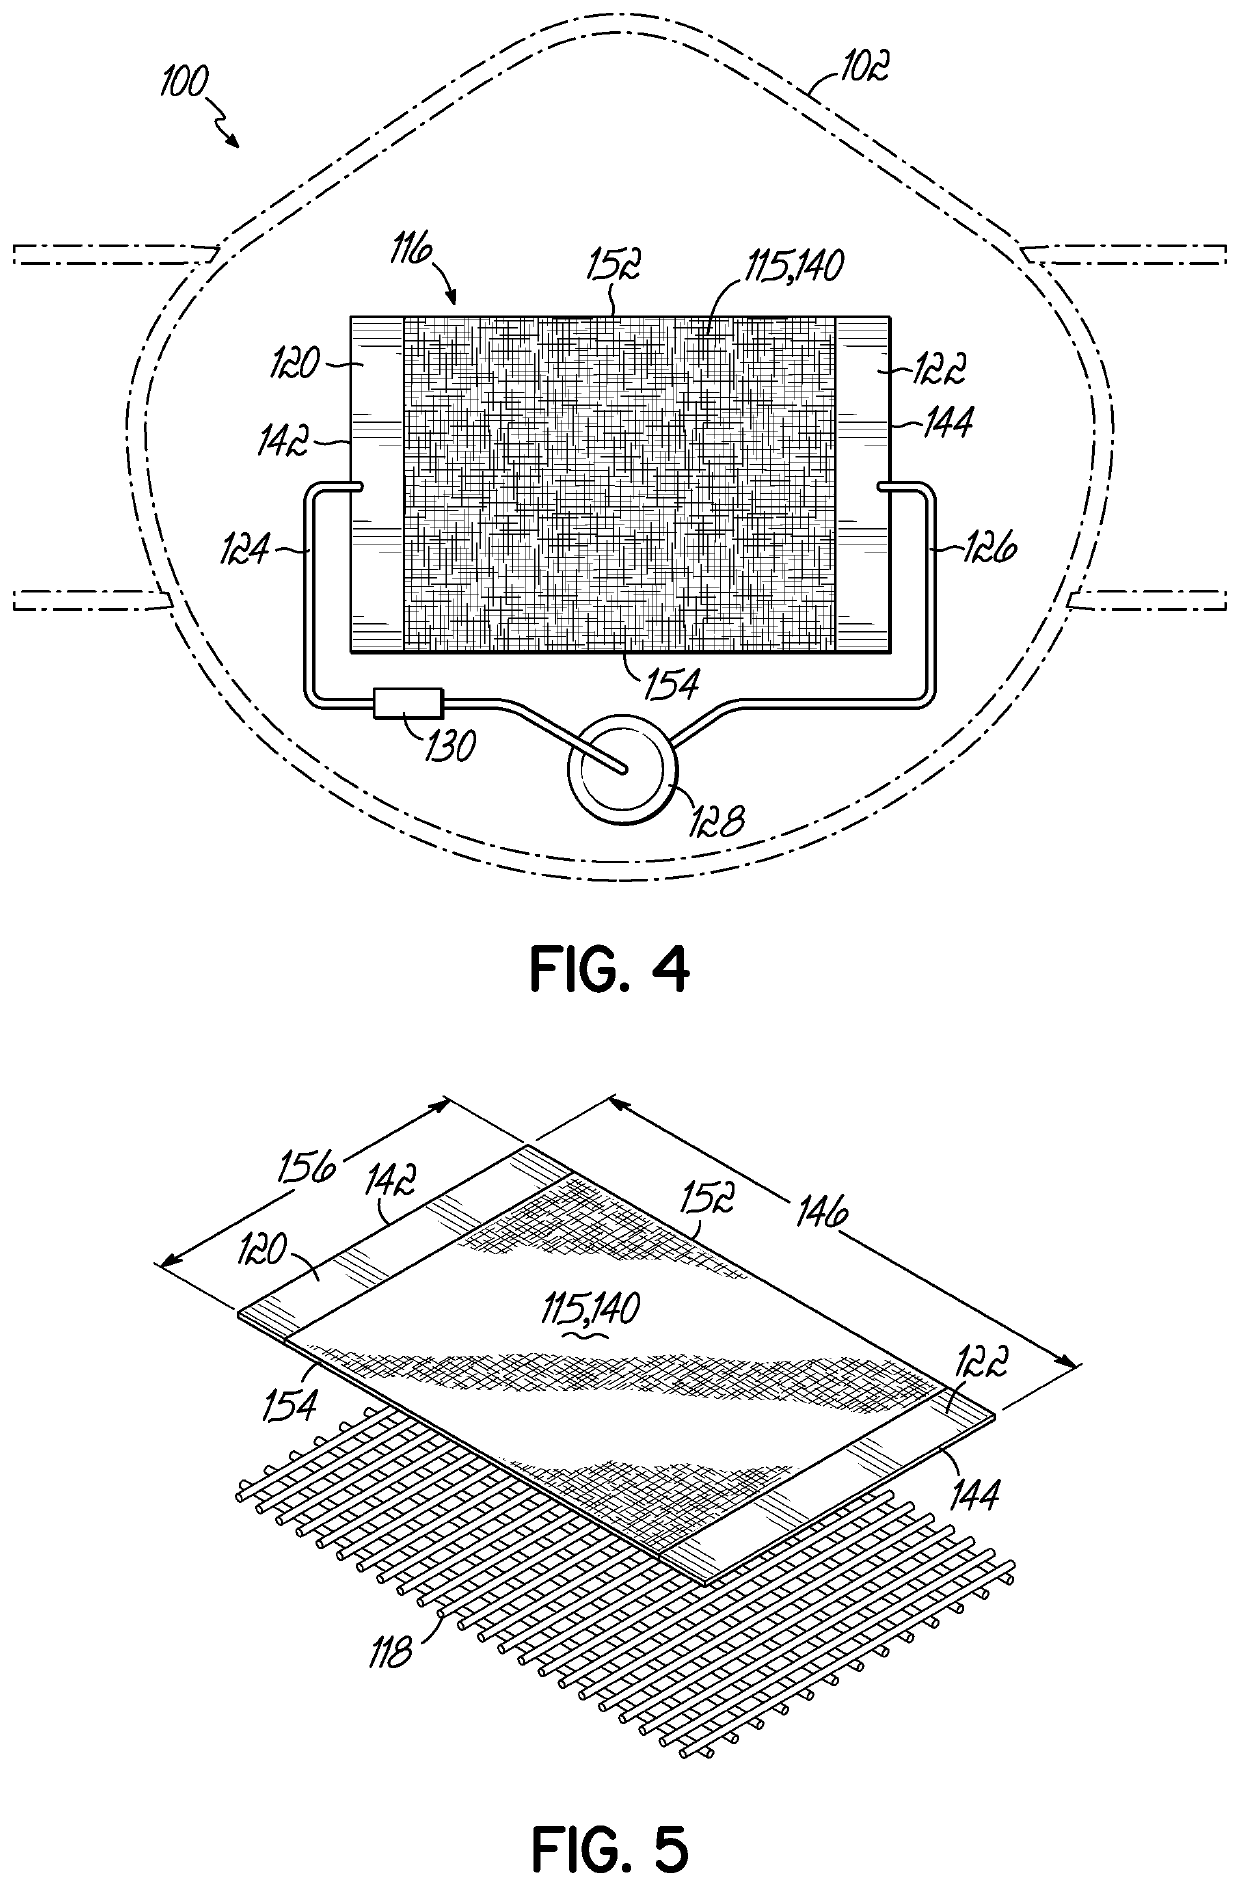 Carbon-based filters for use in eliminating pathogens